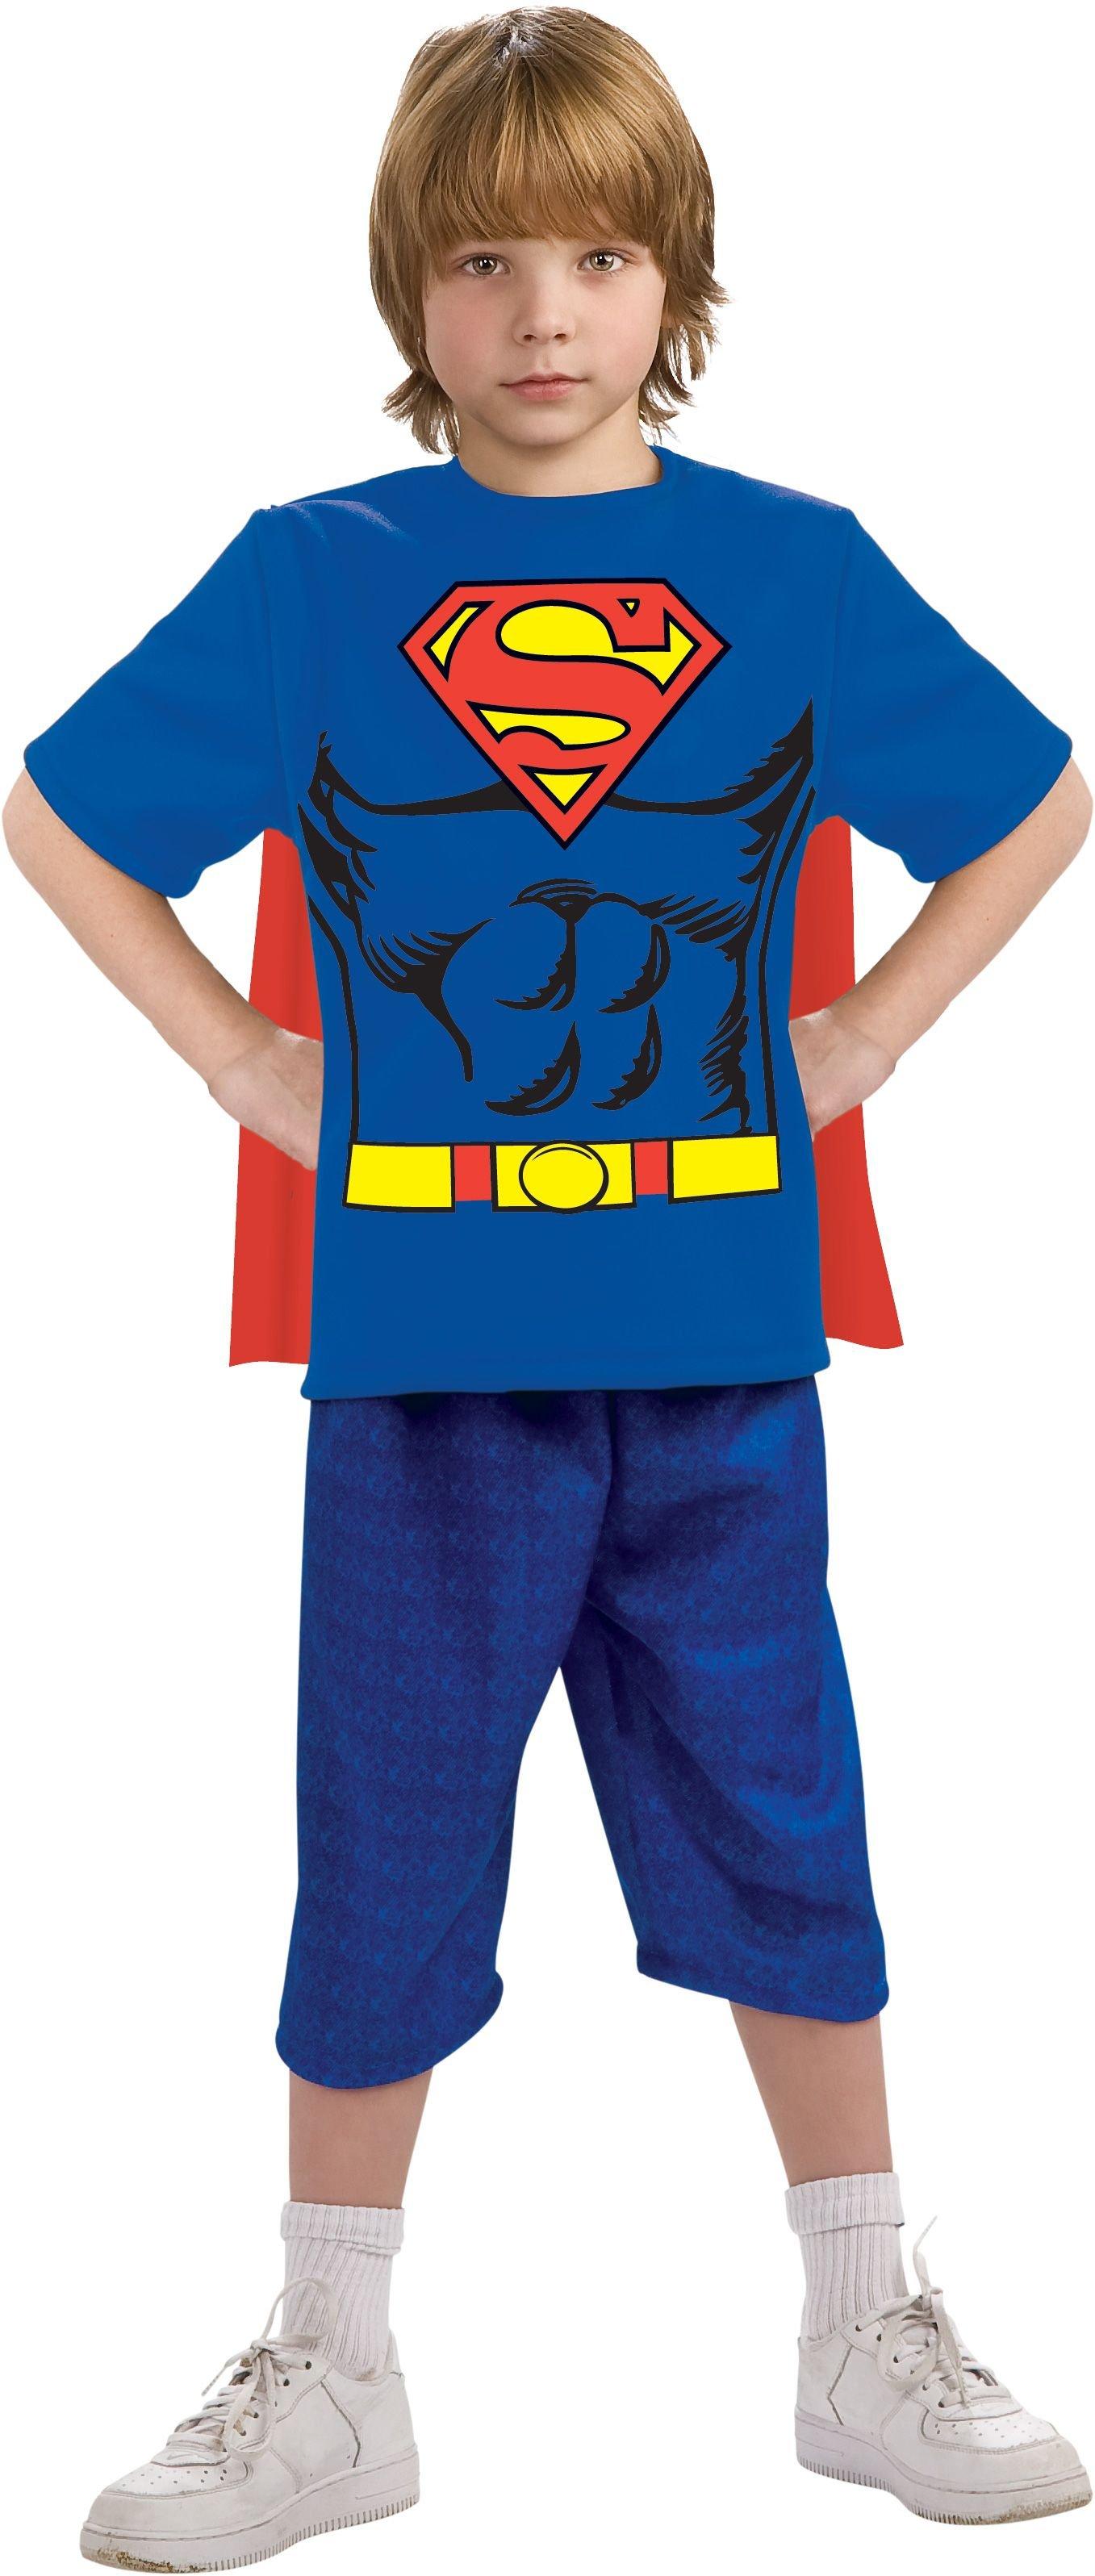 Boys Superman T-Shirt with Cape | Party City